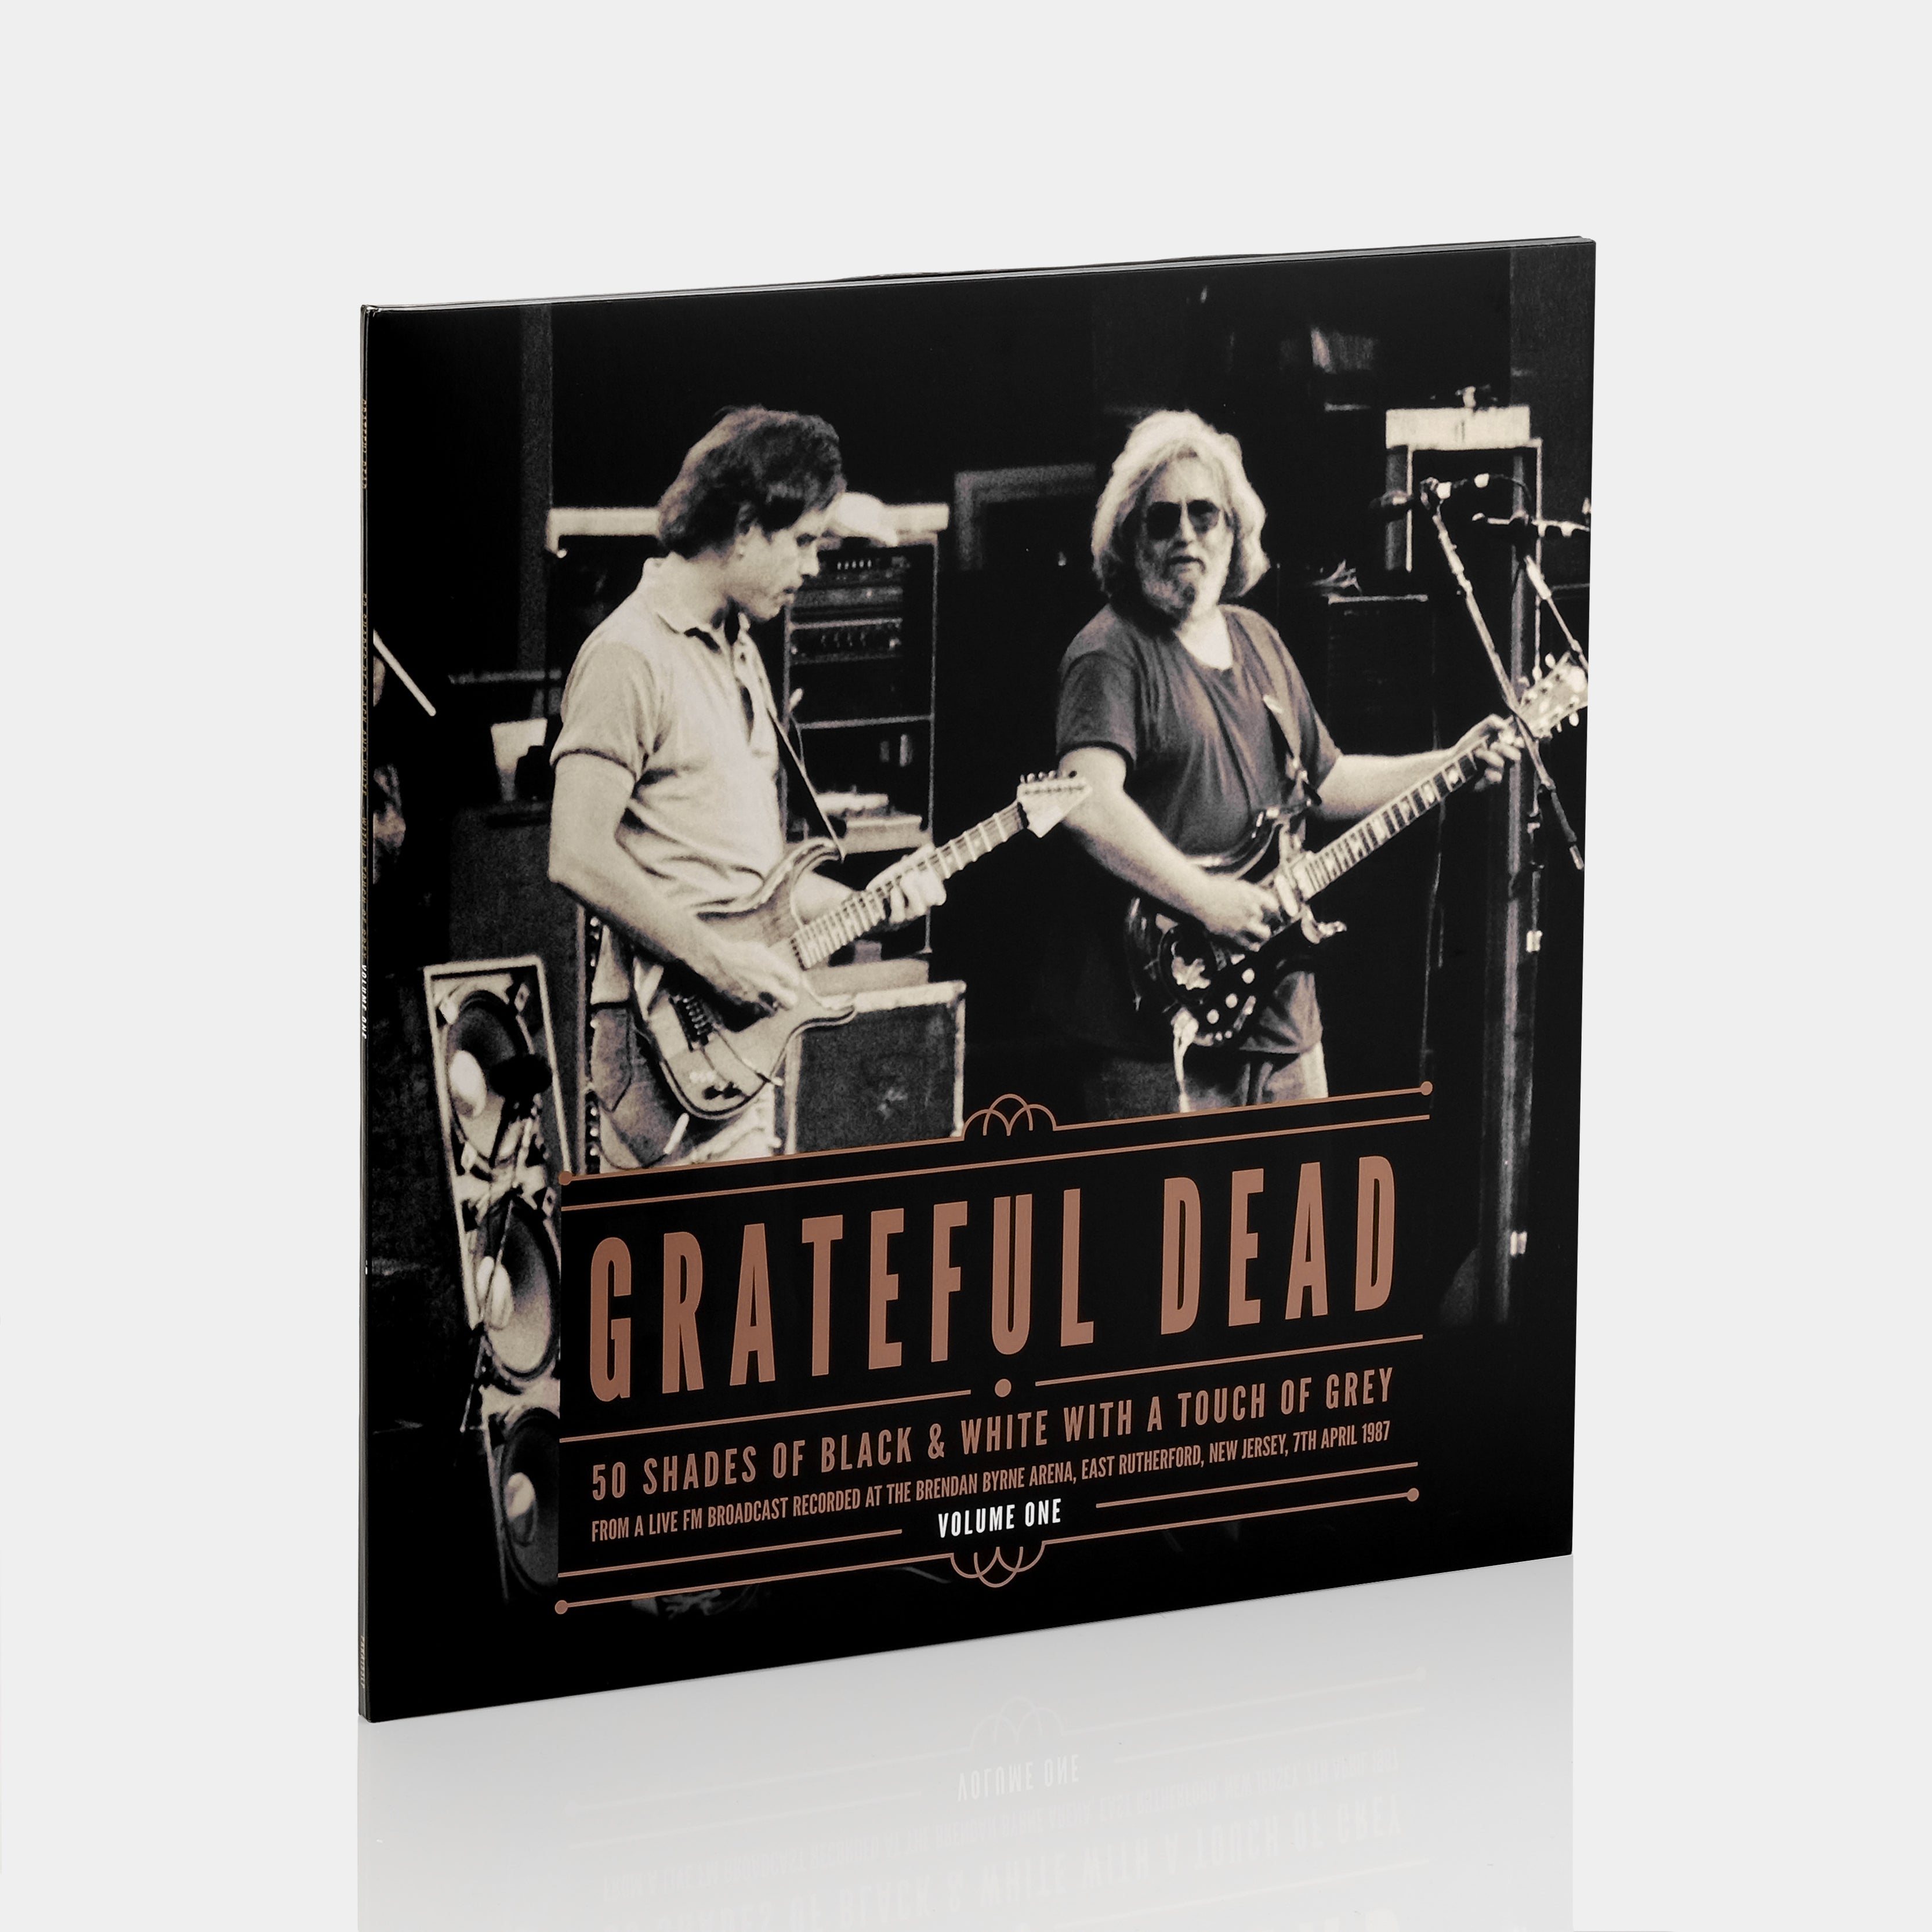 Grateful Dead - 50 Shades of Black & White With a Touch of Grey (Volume 1) 2xLP Vinyl Record